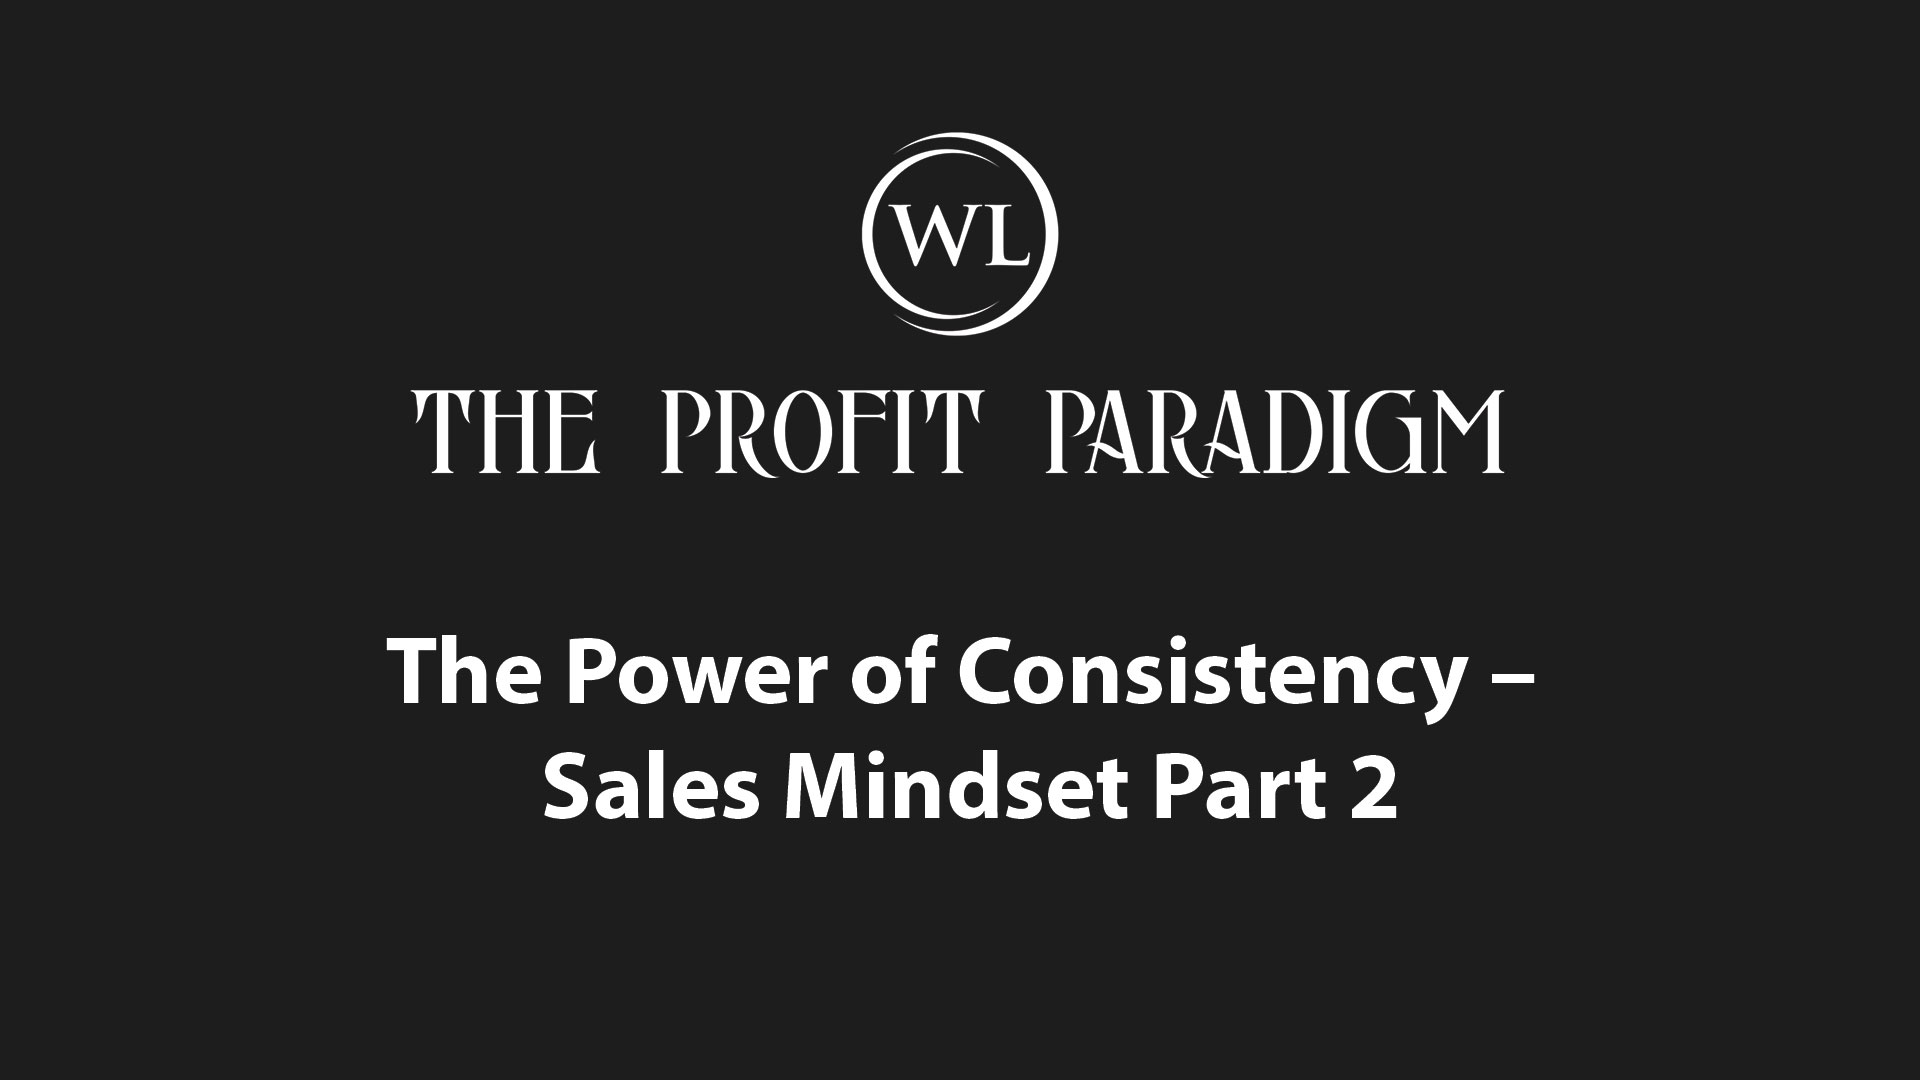 The Power of Consistency – Sales Mindset Part 2